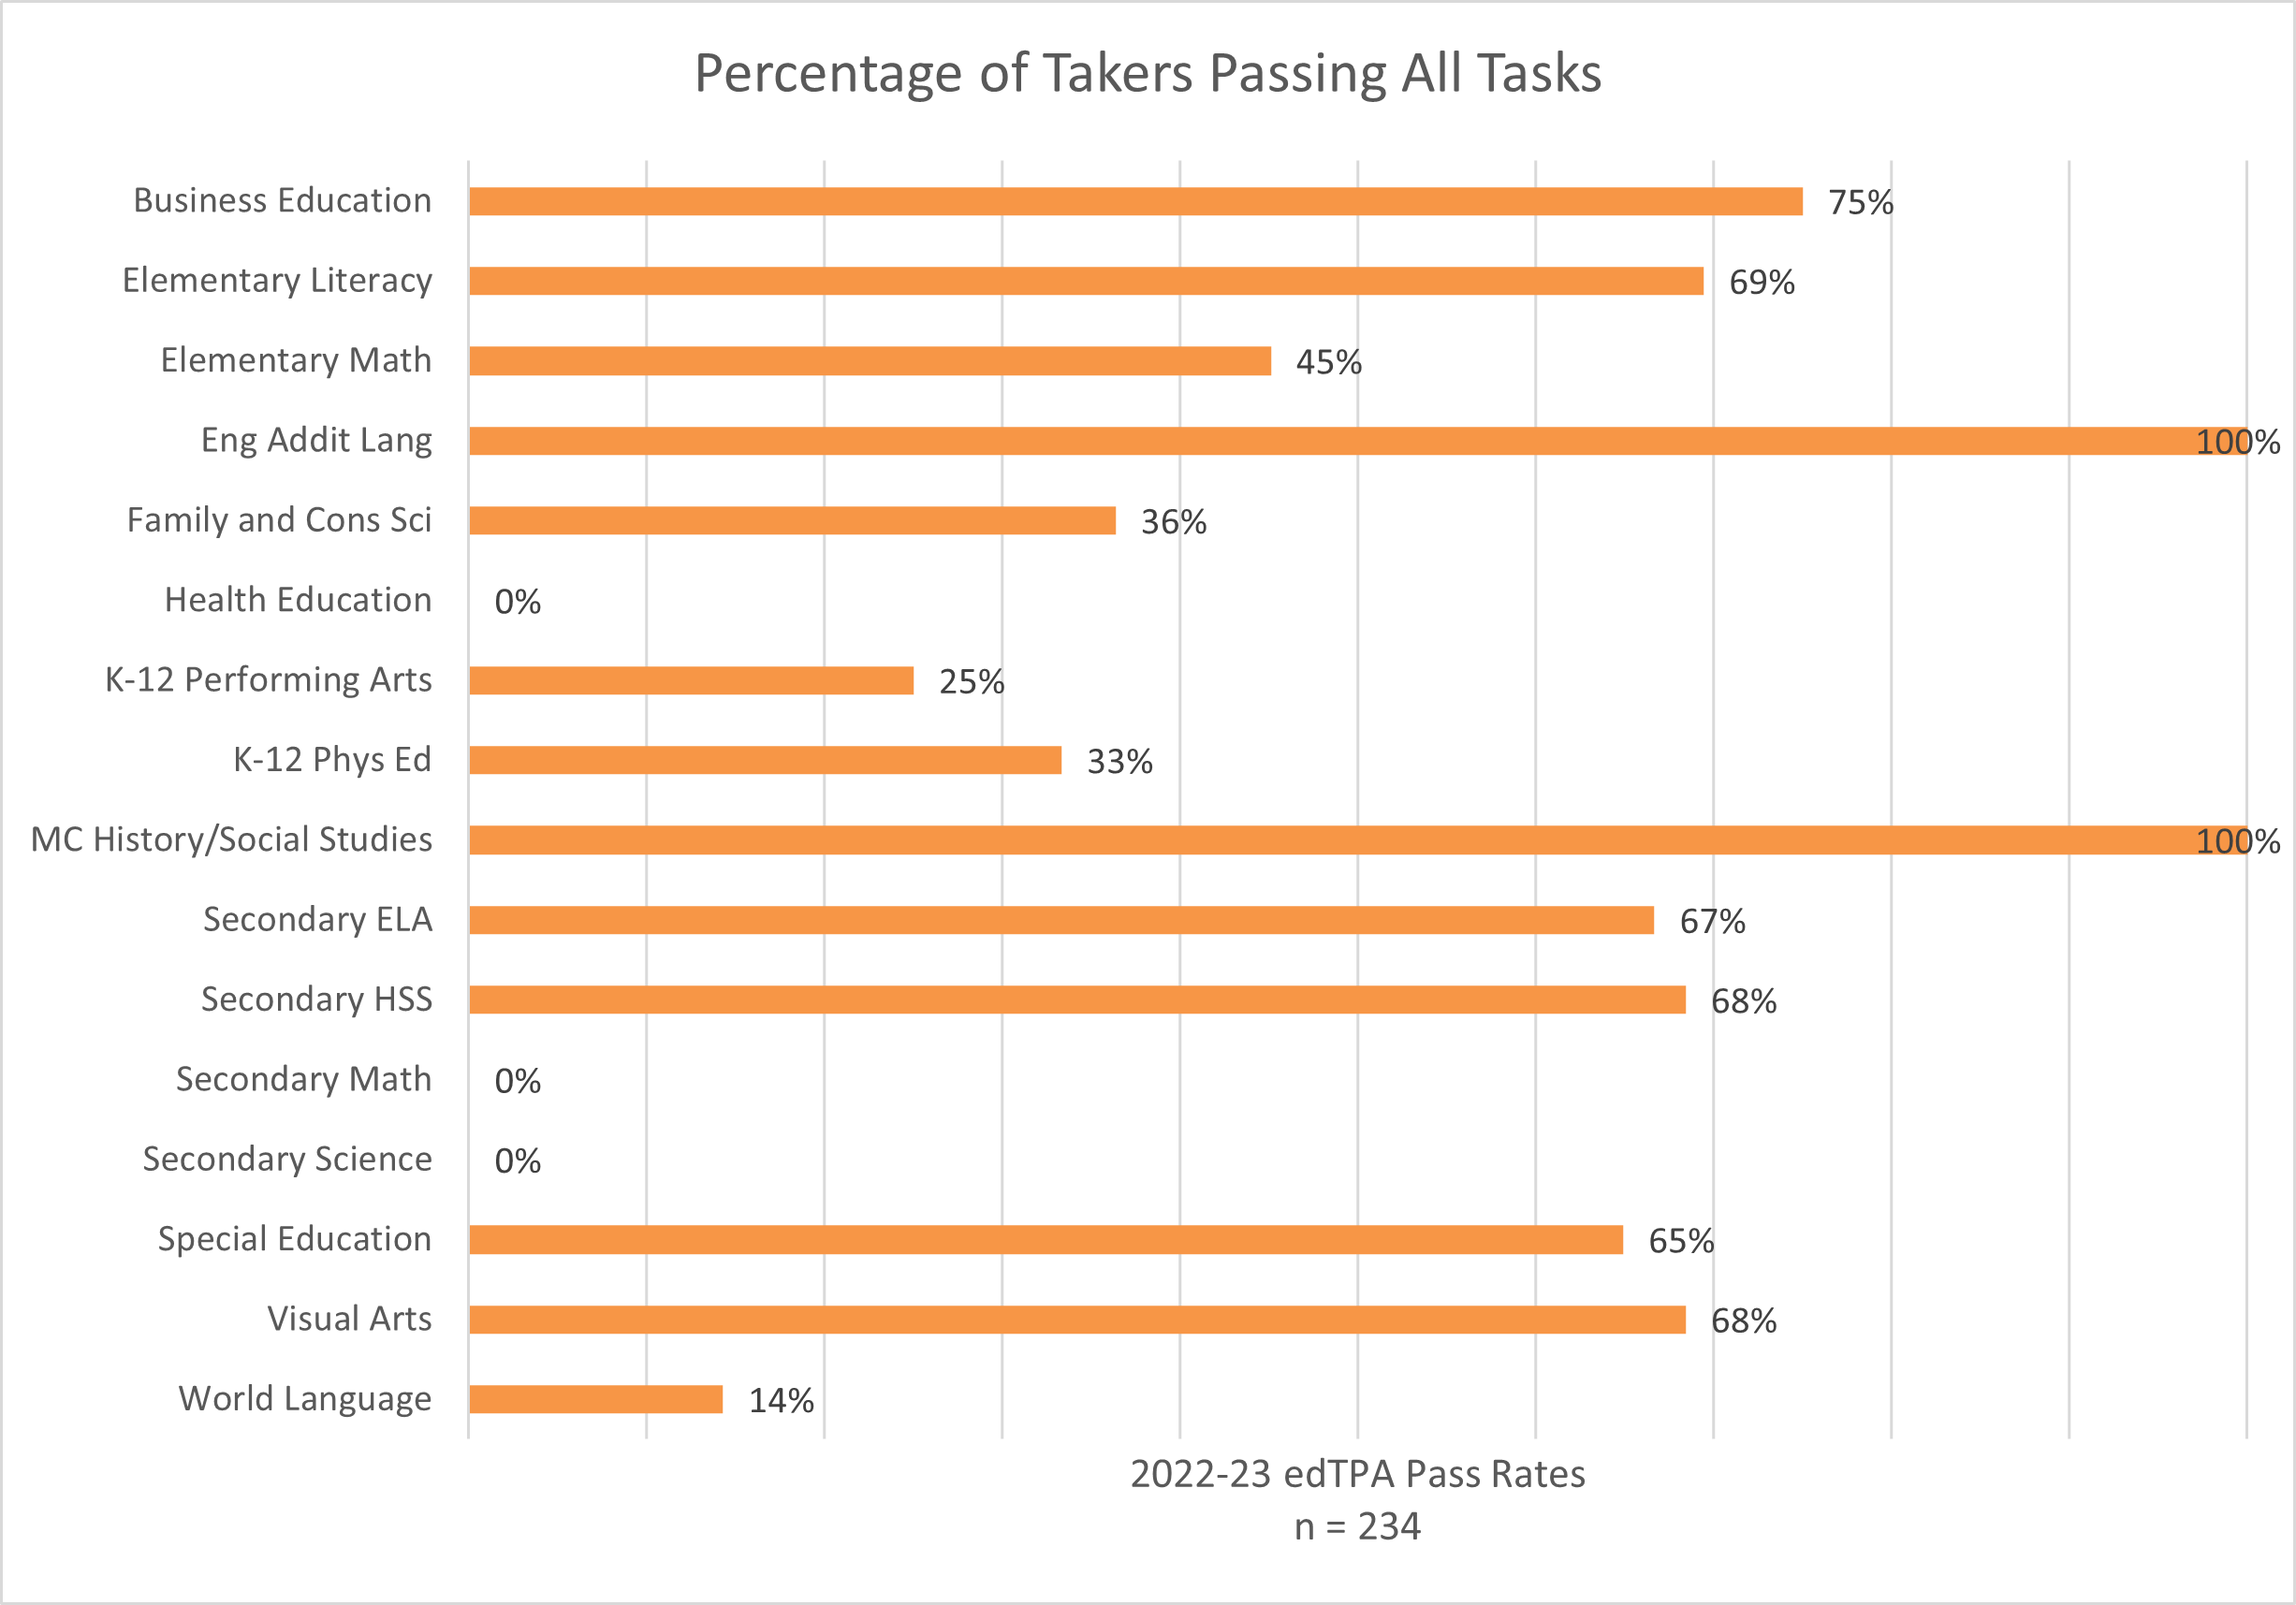 Bar Chart with edTPA Pass Rates by Test